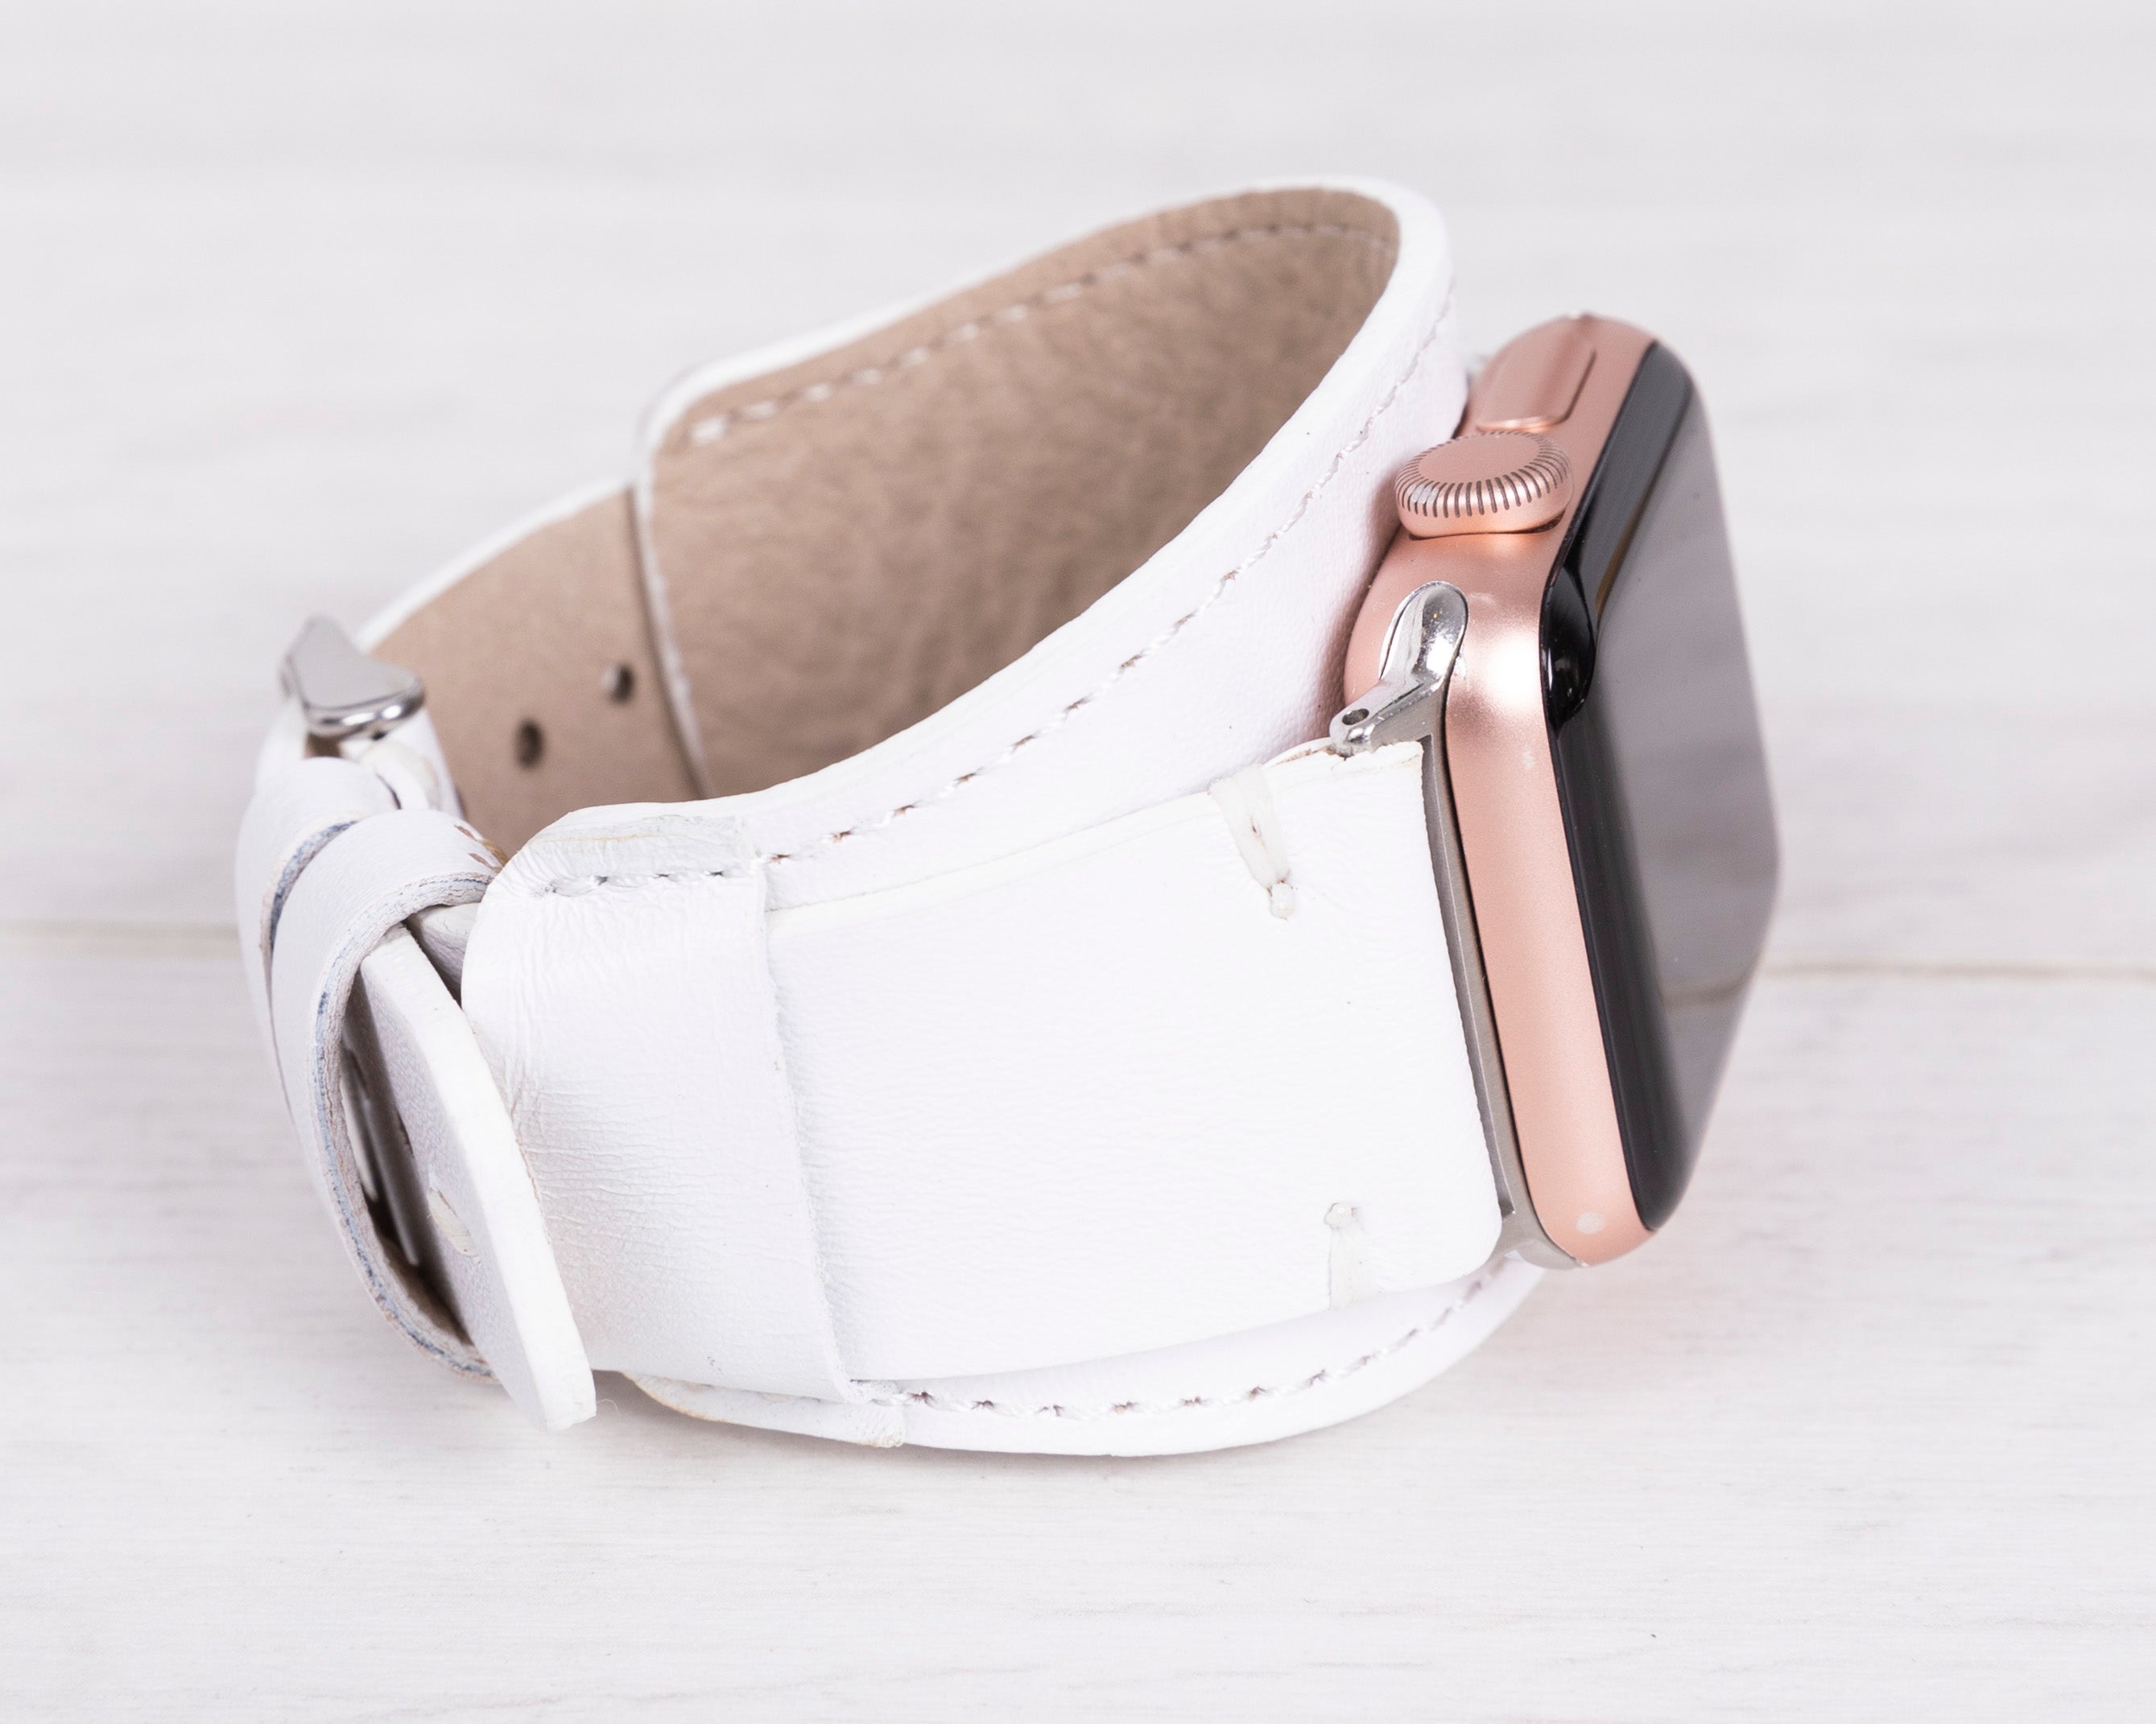 White Full Grain Leather Cuff for Apple Watch